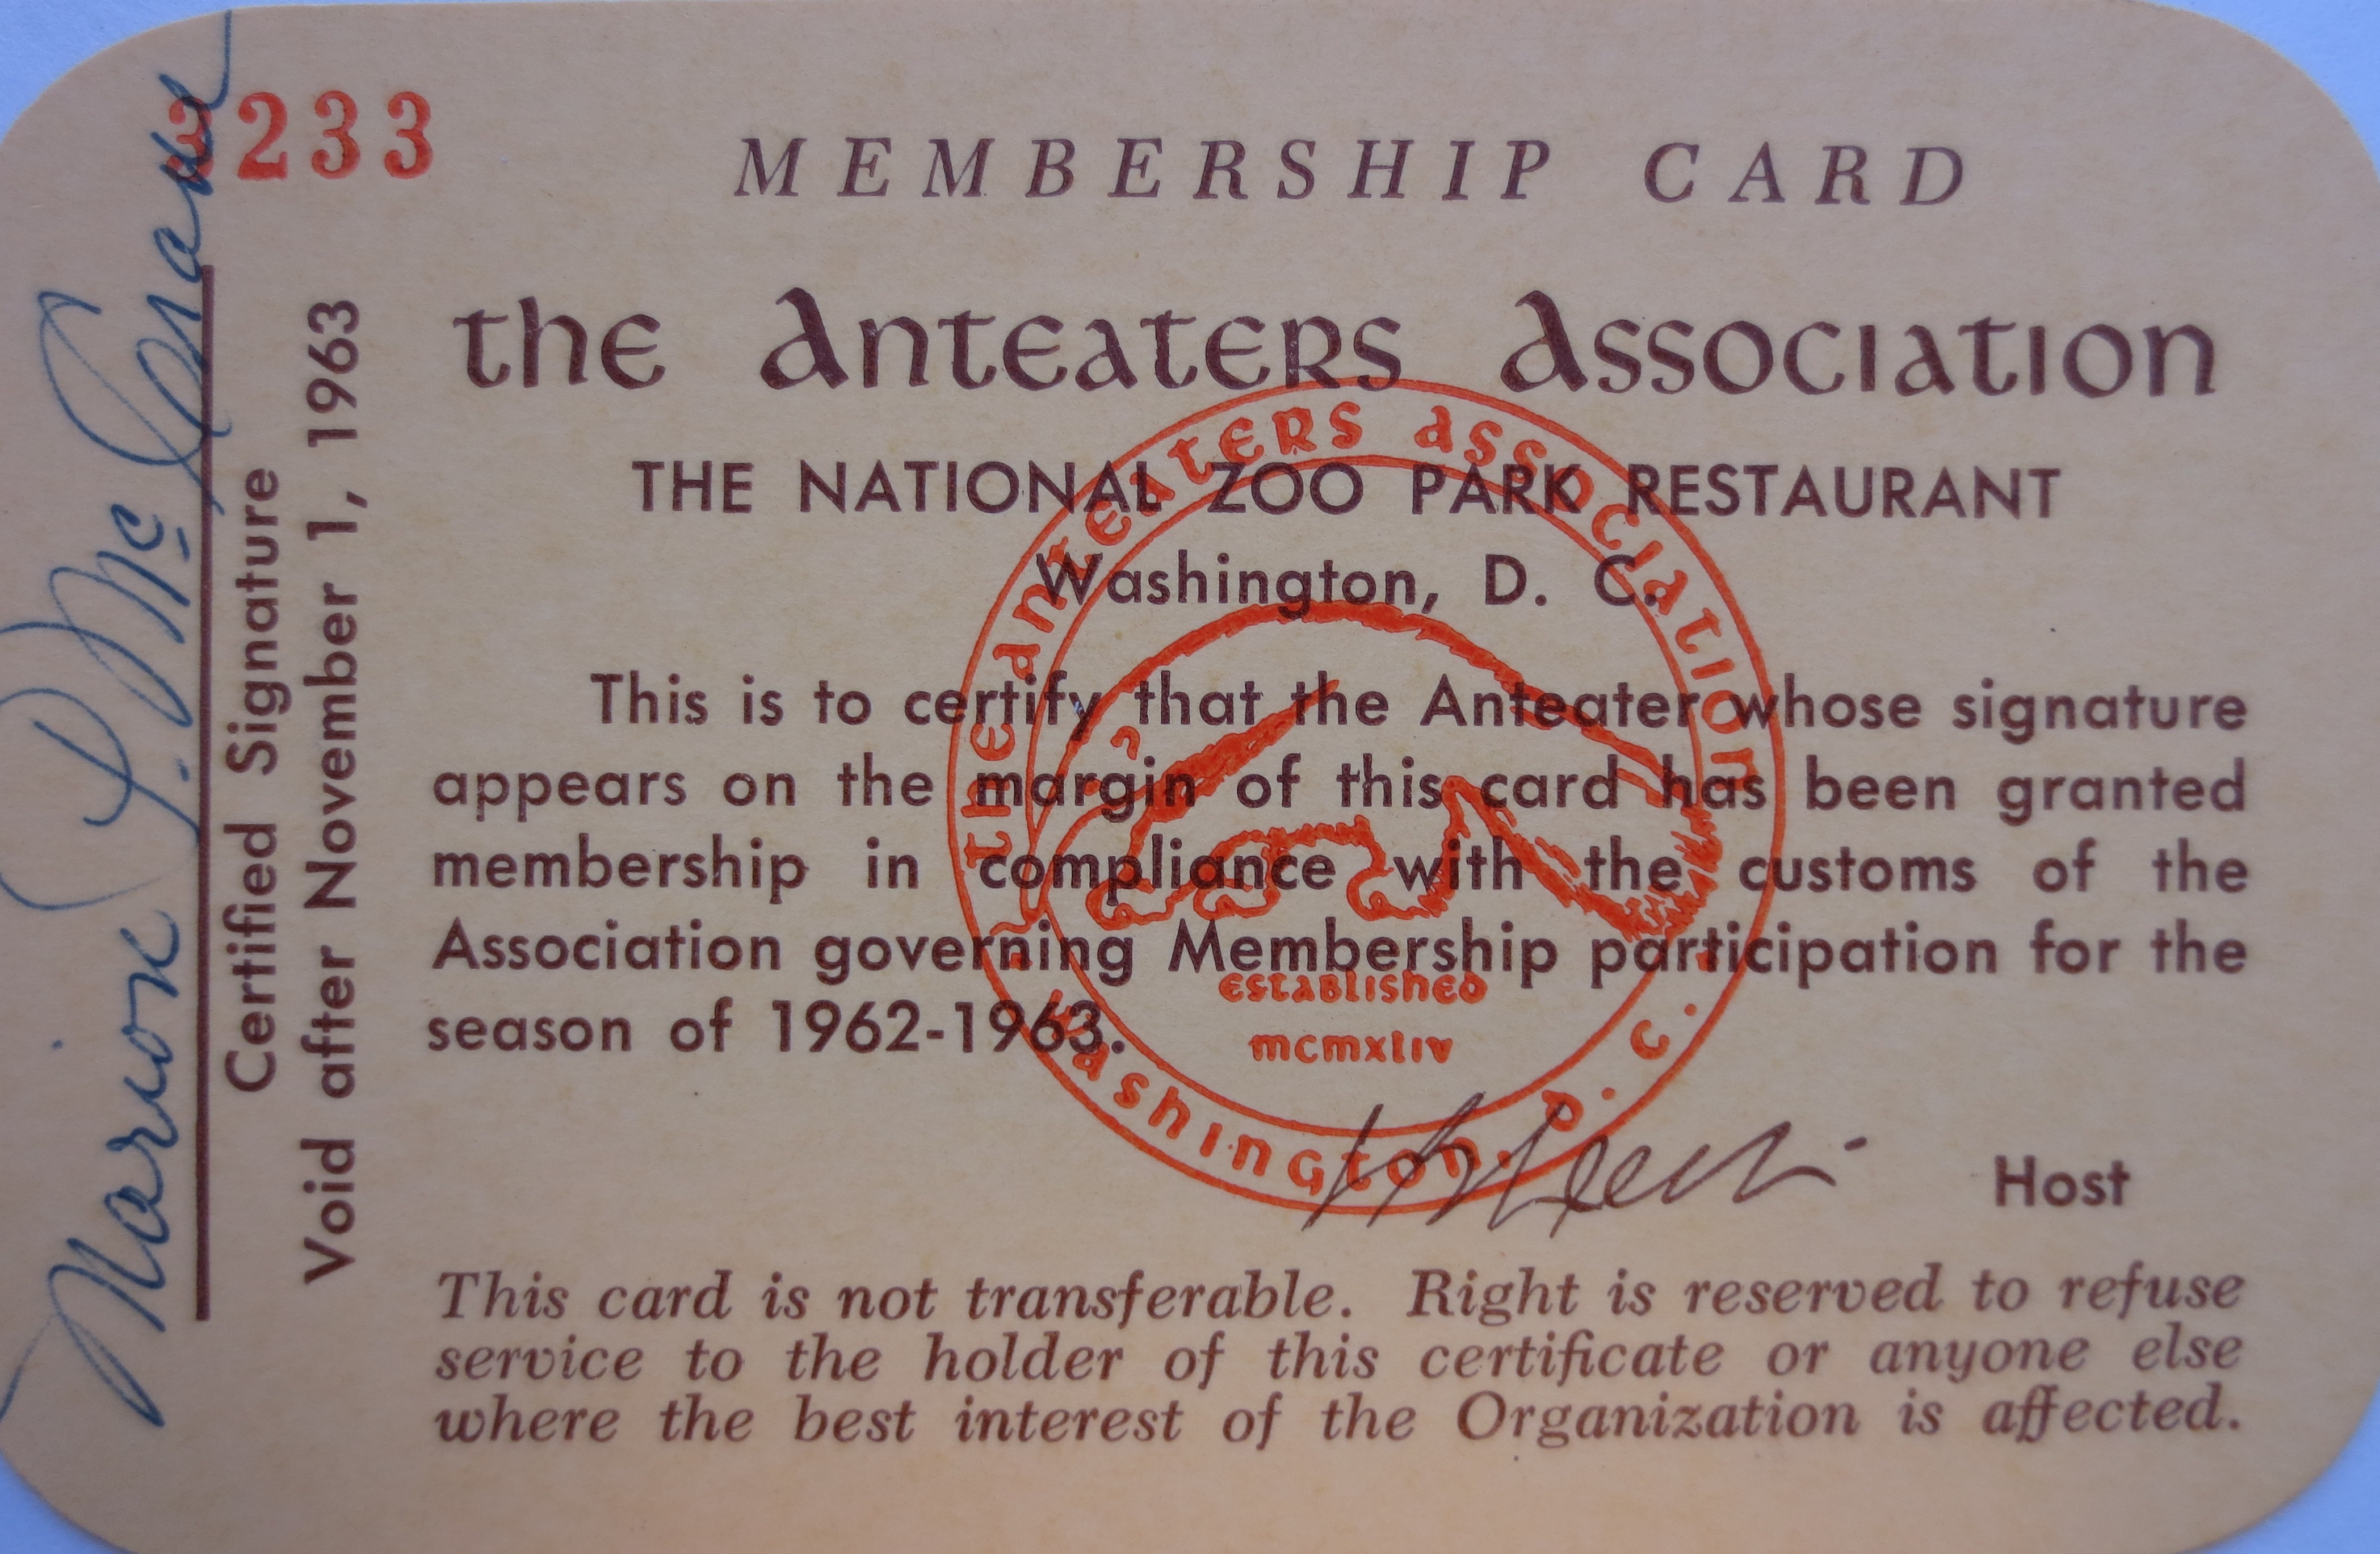 Anteaters Association membership card issued to Marion P. McCrane for the 1962-1963 season, Accession 01-157 - Marion P. McCrane Papers, 1962-1989, Smithsonian Institution Archives.